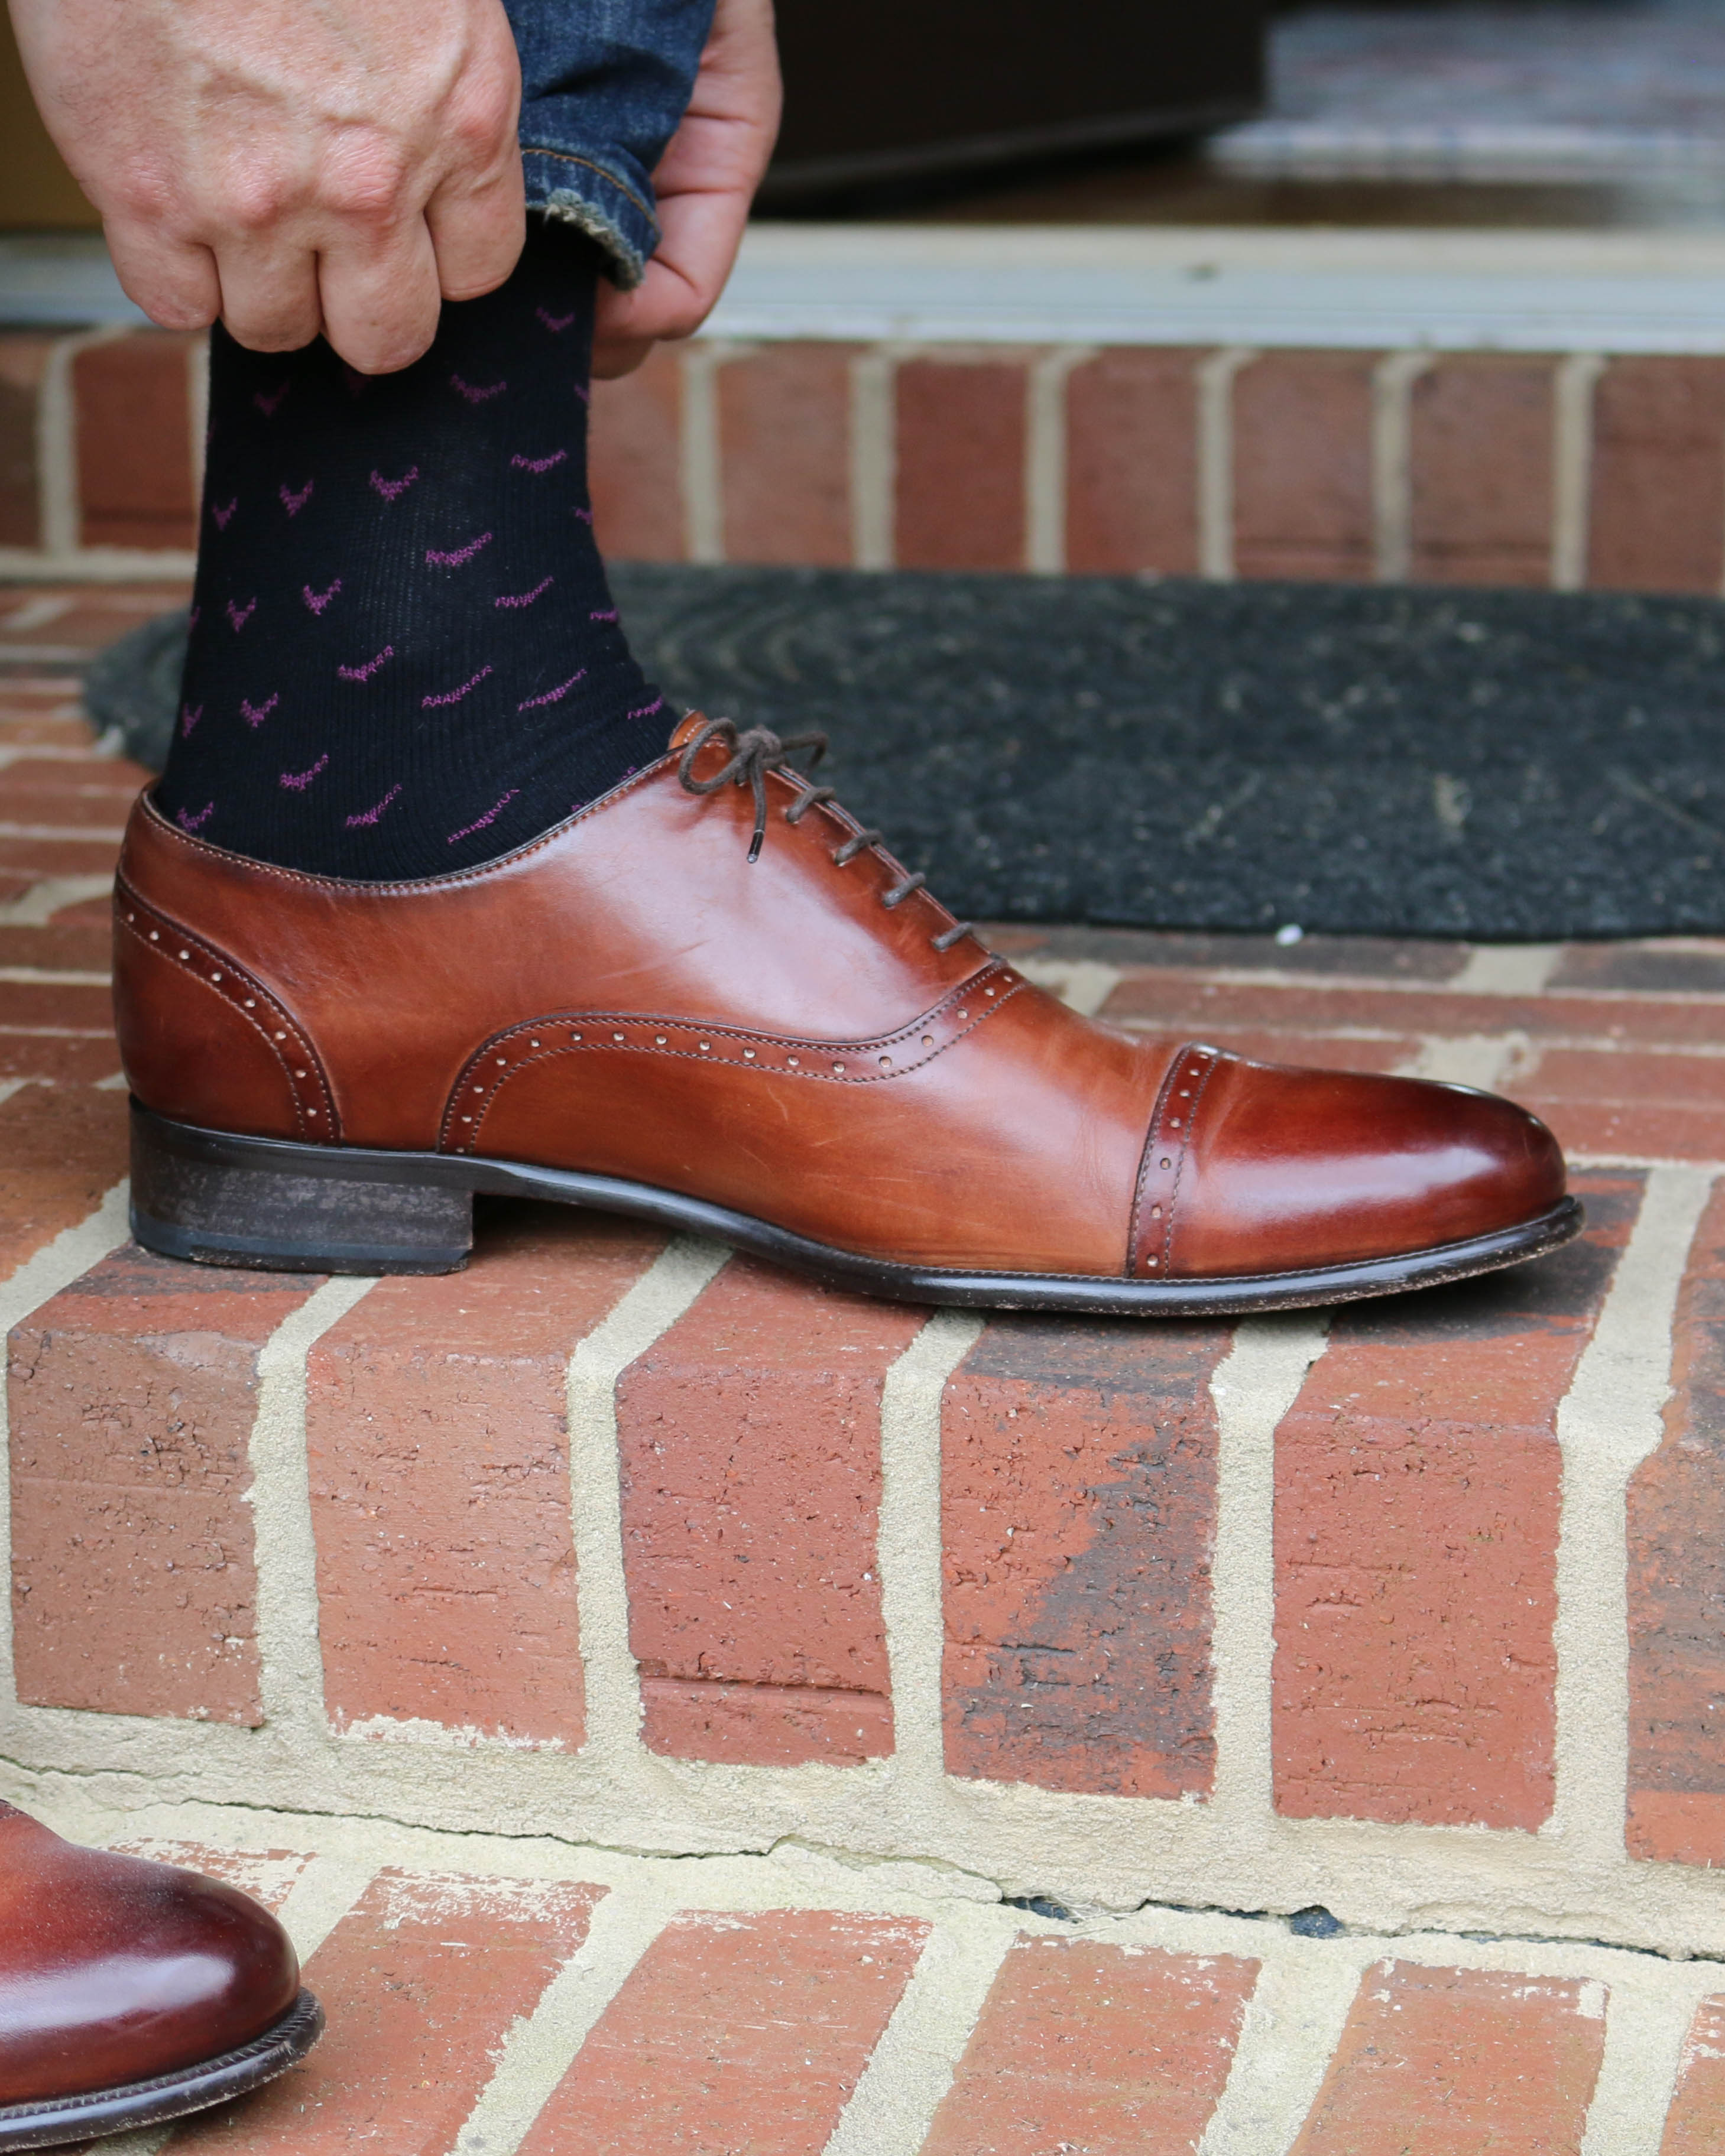 black over the calf dress socks with pink print, blue jeans, a brown dress shoe